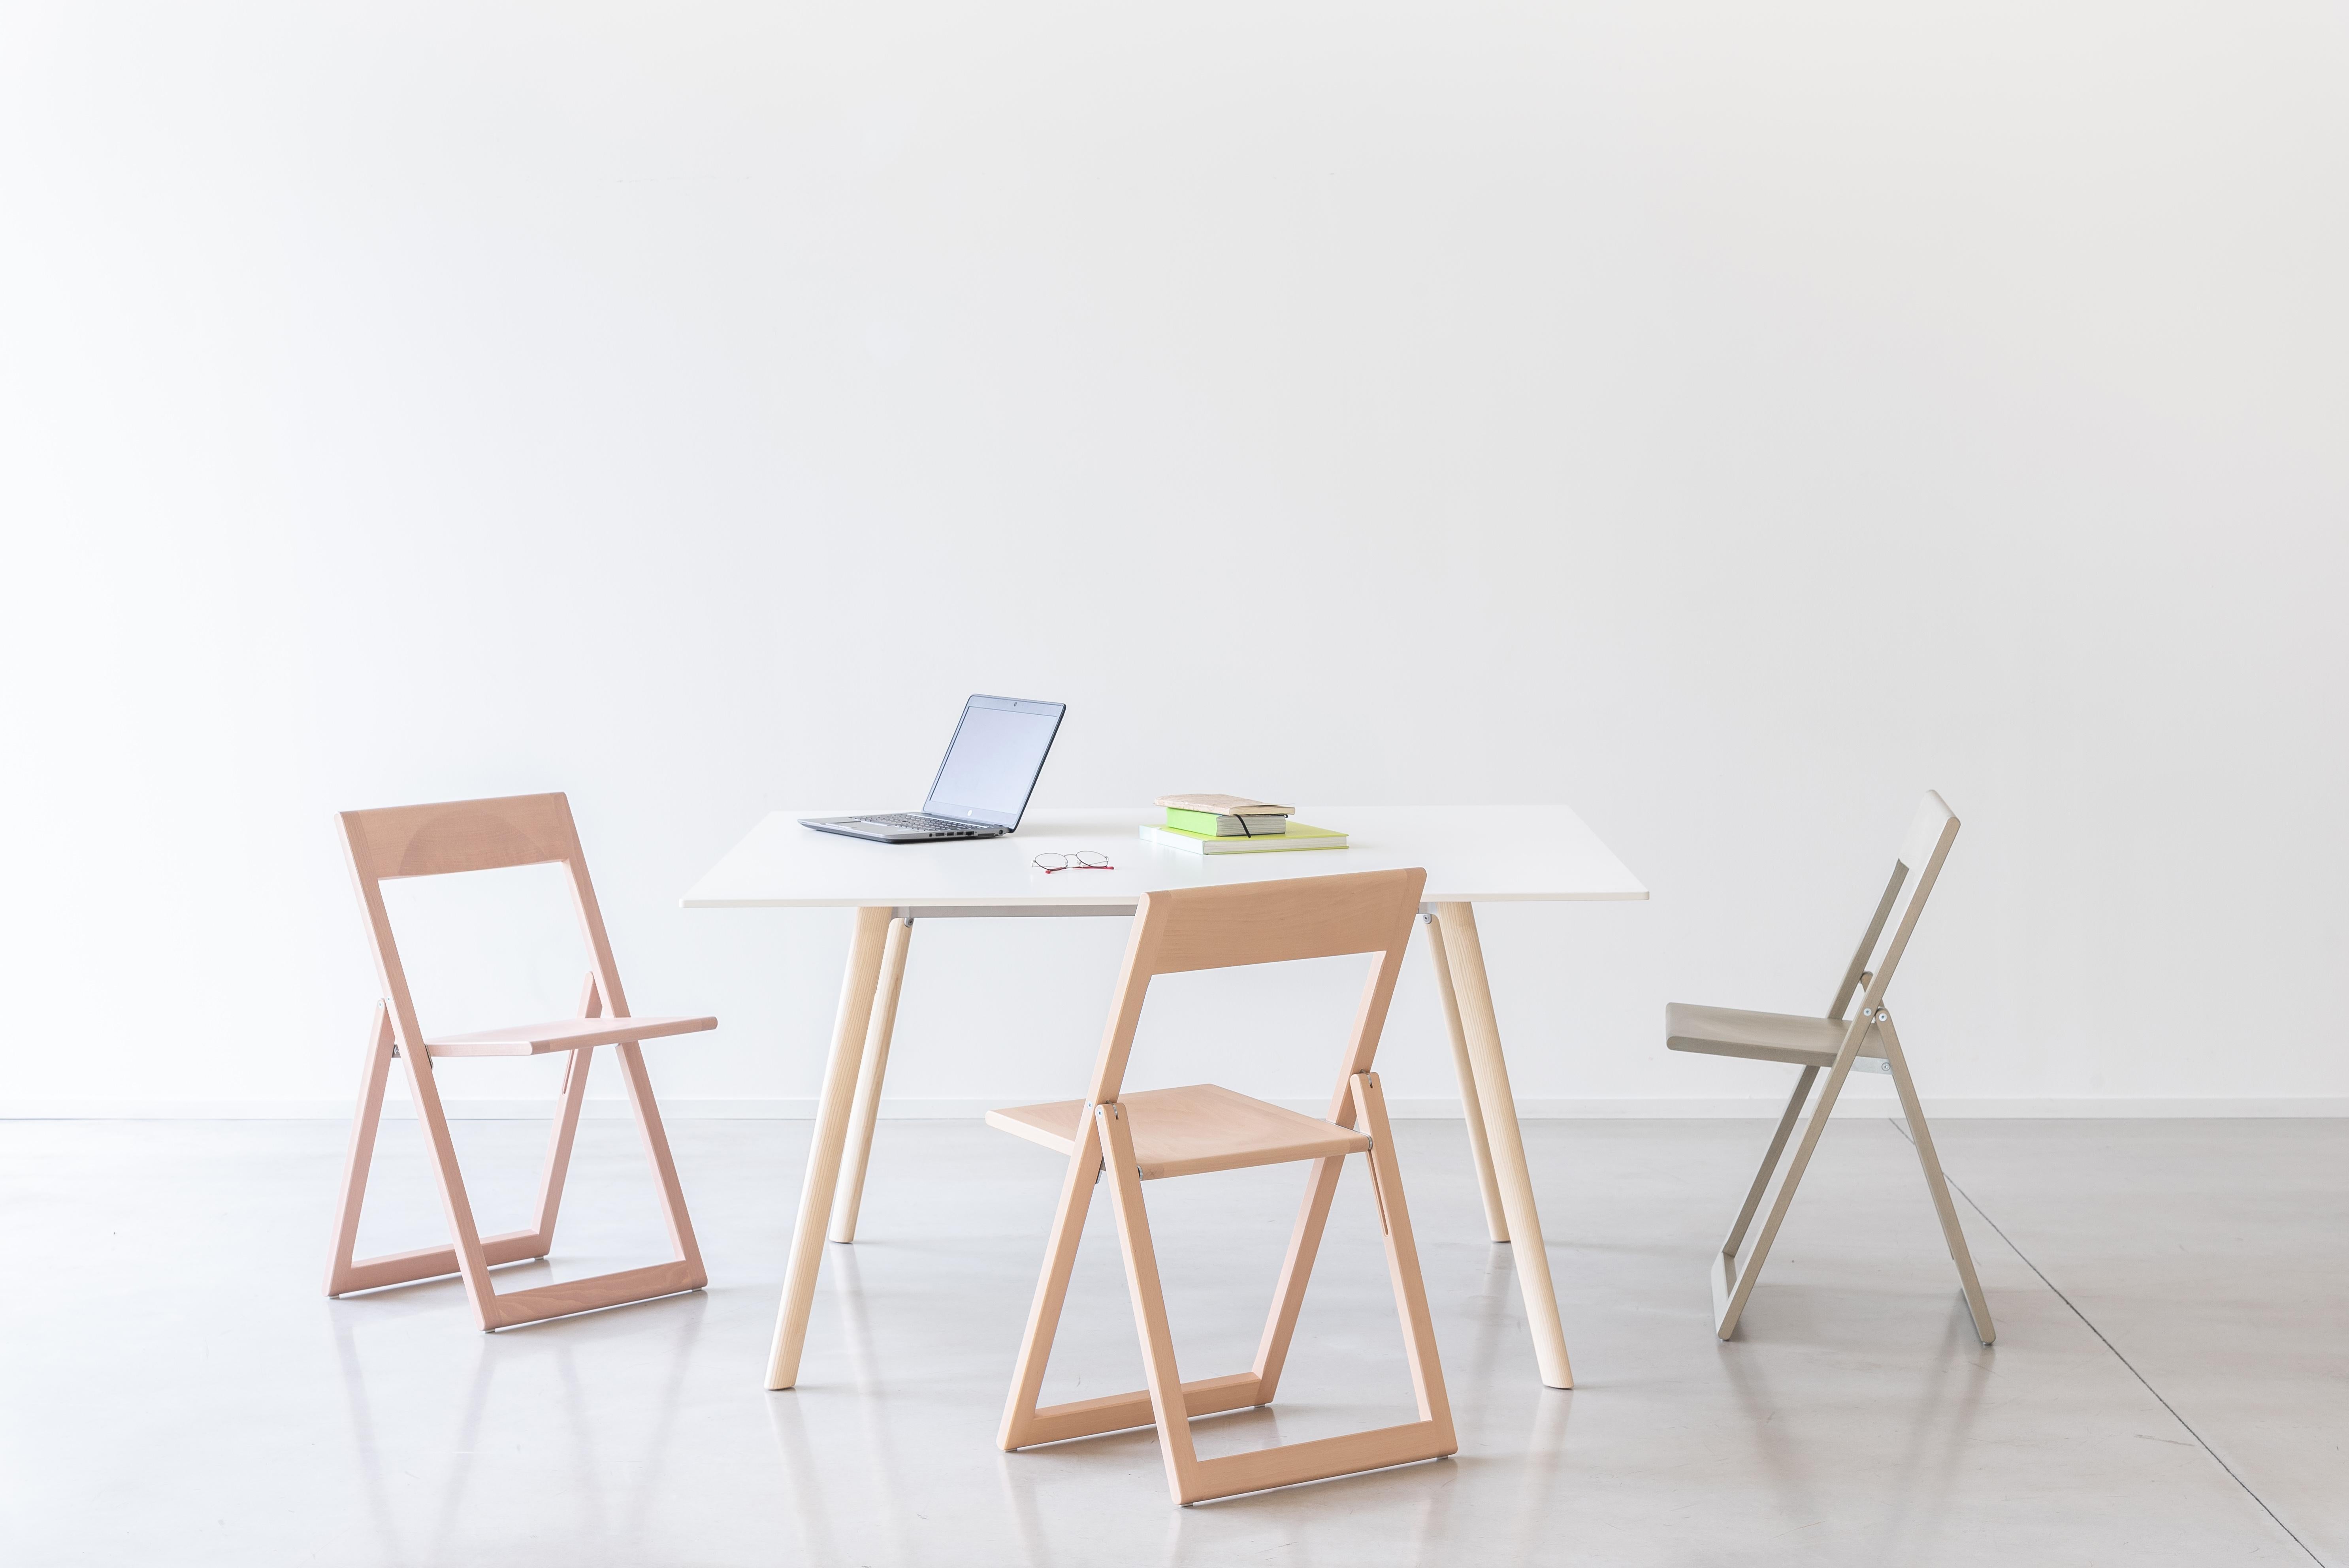 Aviva is a folding chair designed by Marc Berthier at the end of the 70s in re- sponse to the mobility of the urban lifestyle. It has been manufactured by Magis for 20 years and restyled in 2010.
Aviva chairs fold completely flat and are designed